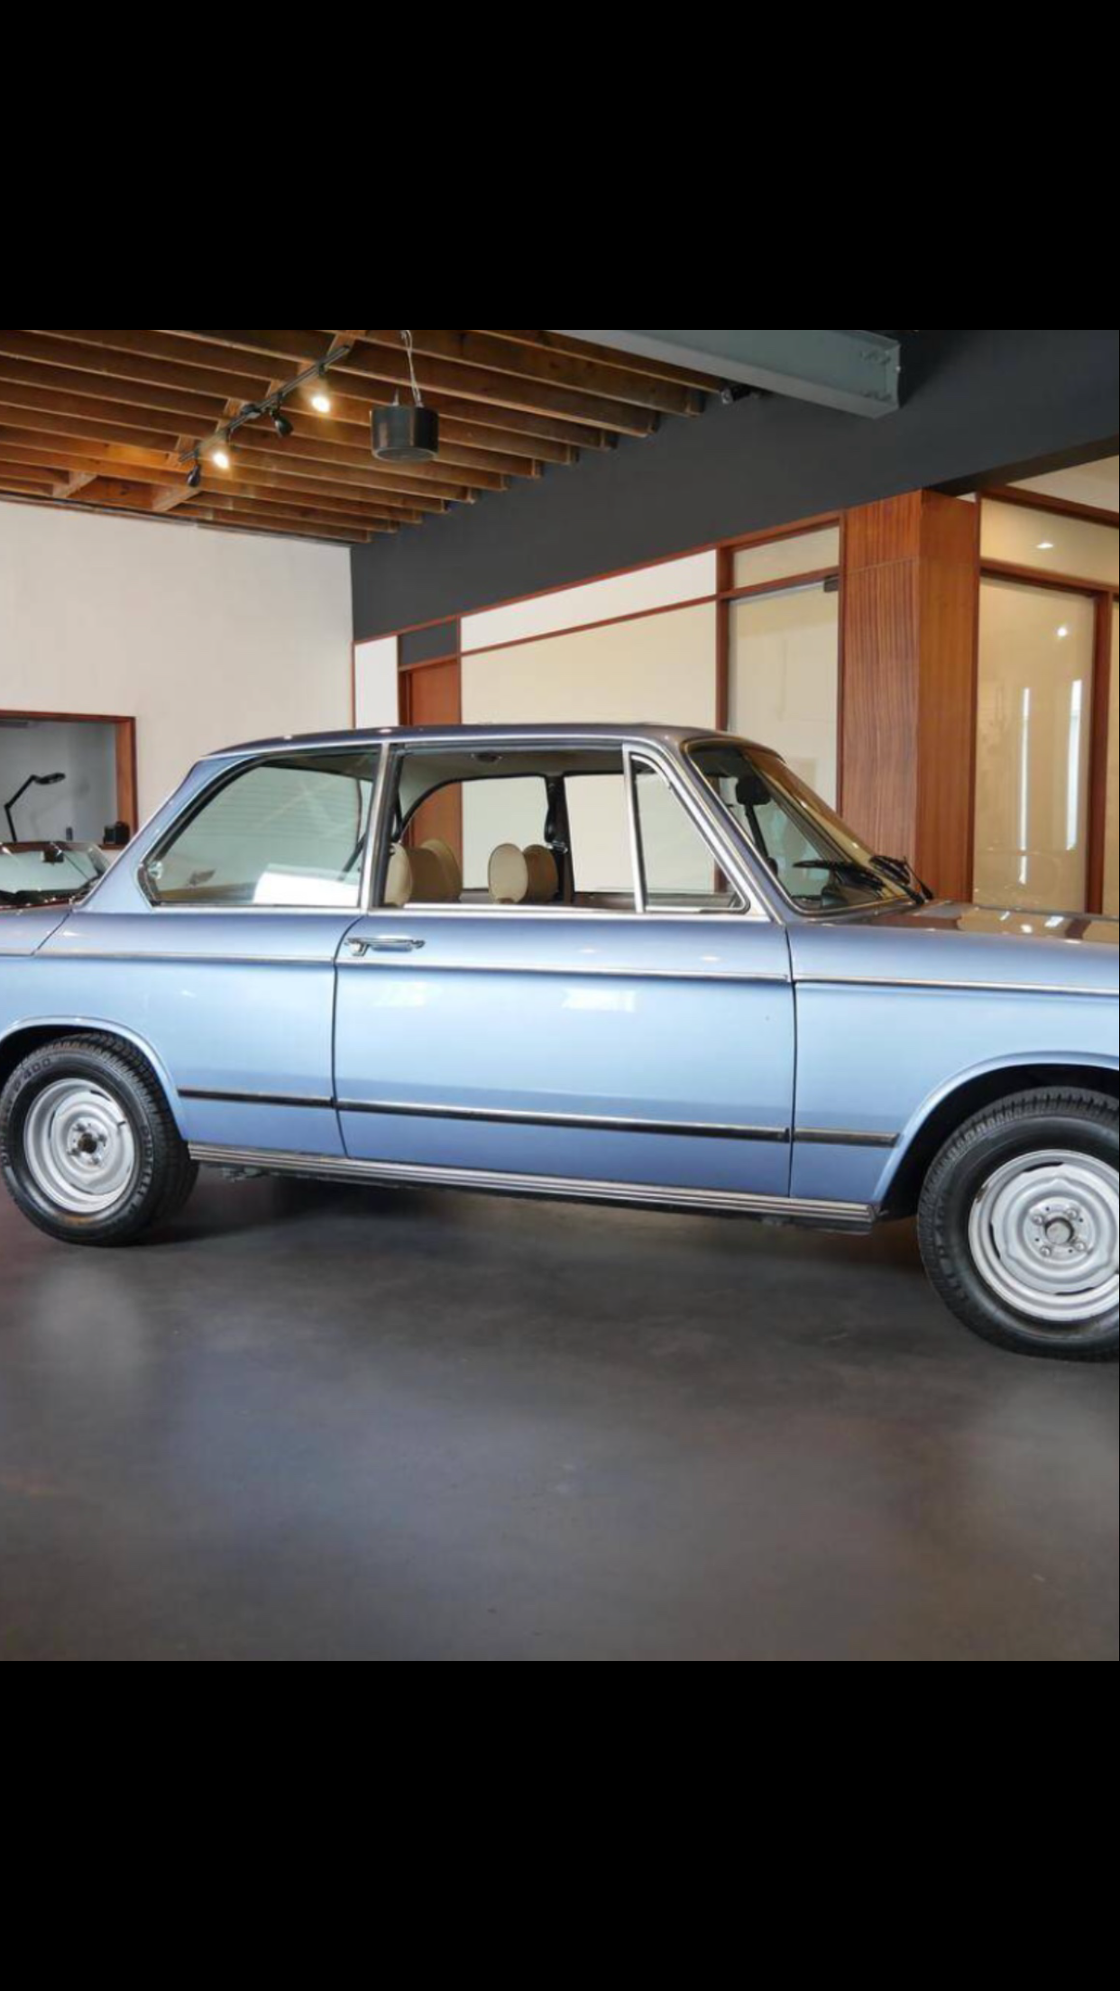 1974 BMW 2002tii - 1974 BMW Tii - Used - VIN 379654098703627 - 90,000 Miles - 4 cyl - 2WD - Coupe - Blue - Miami, FL 33176, United States